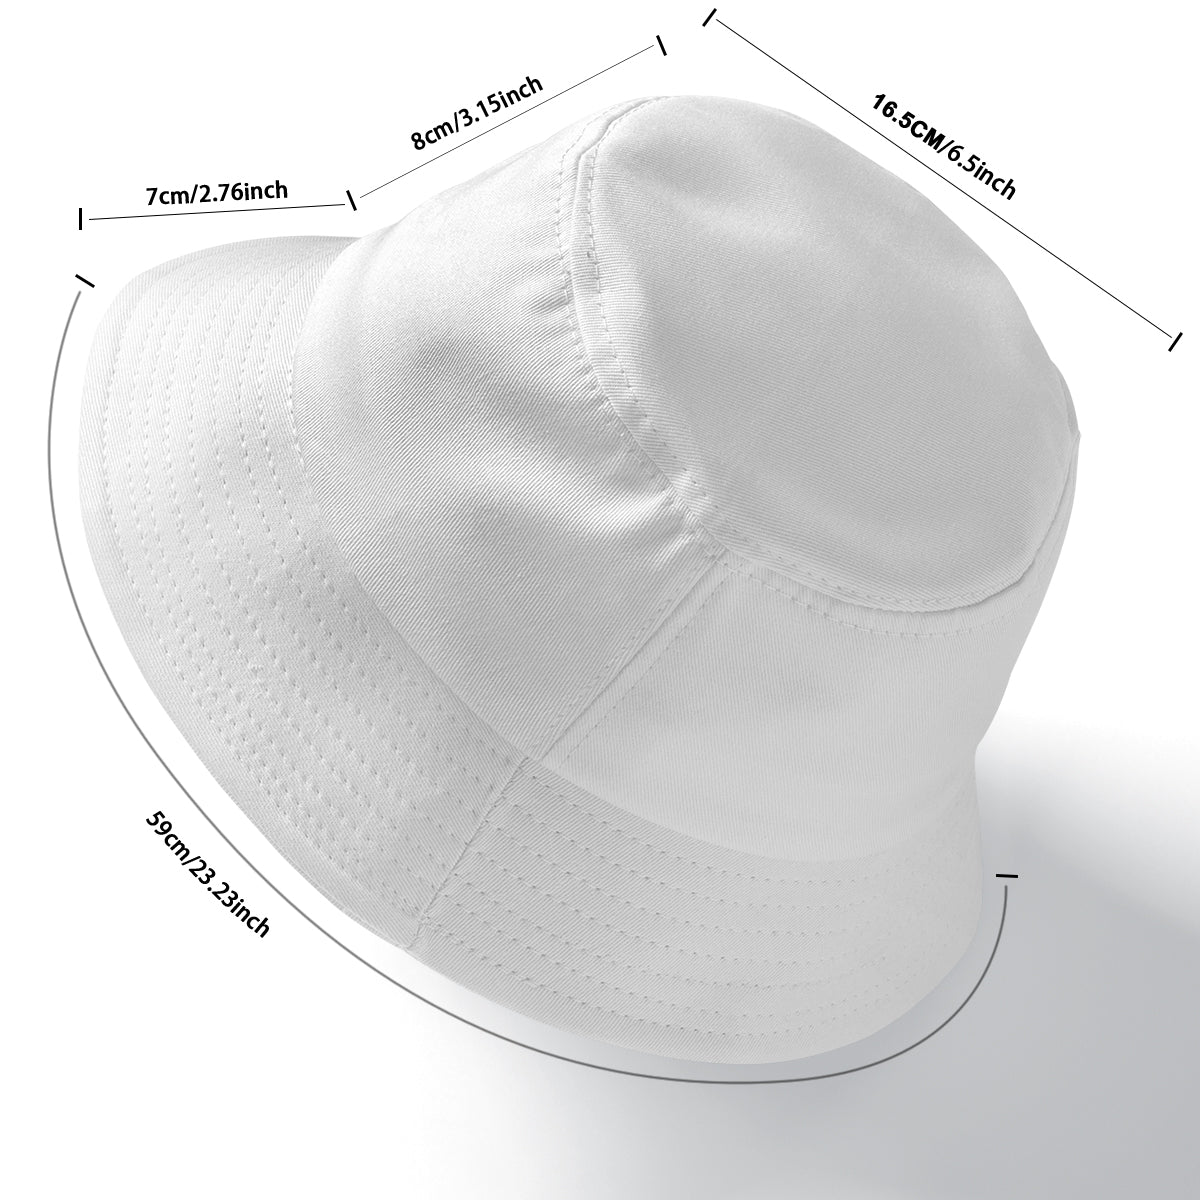 double-side printing fisherman hat